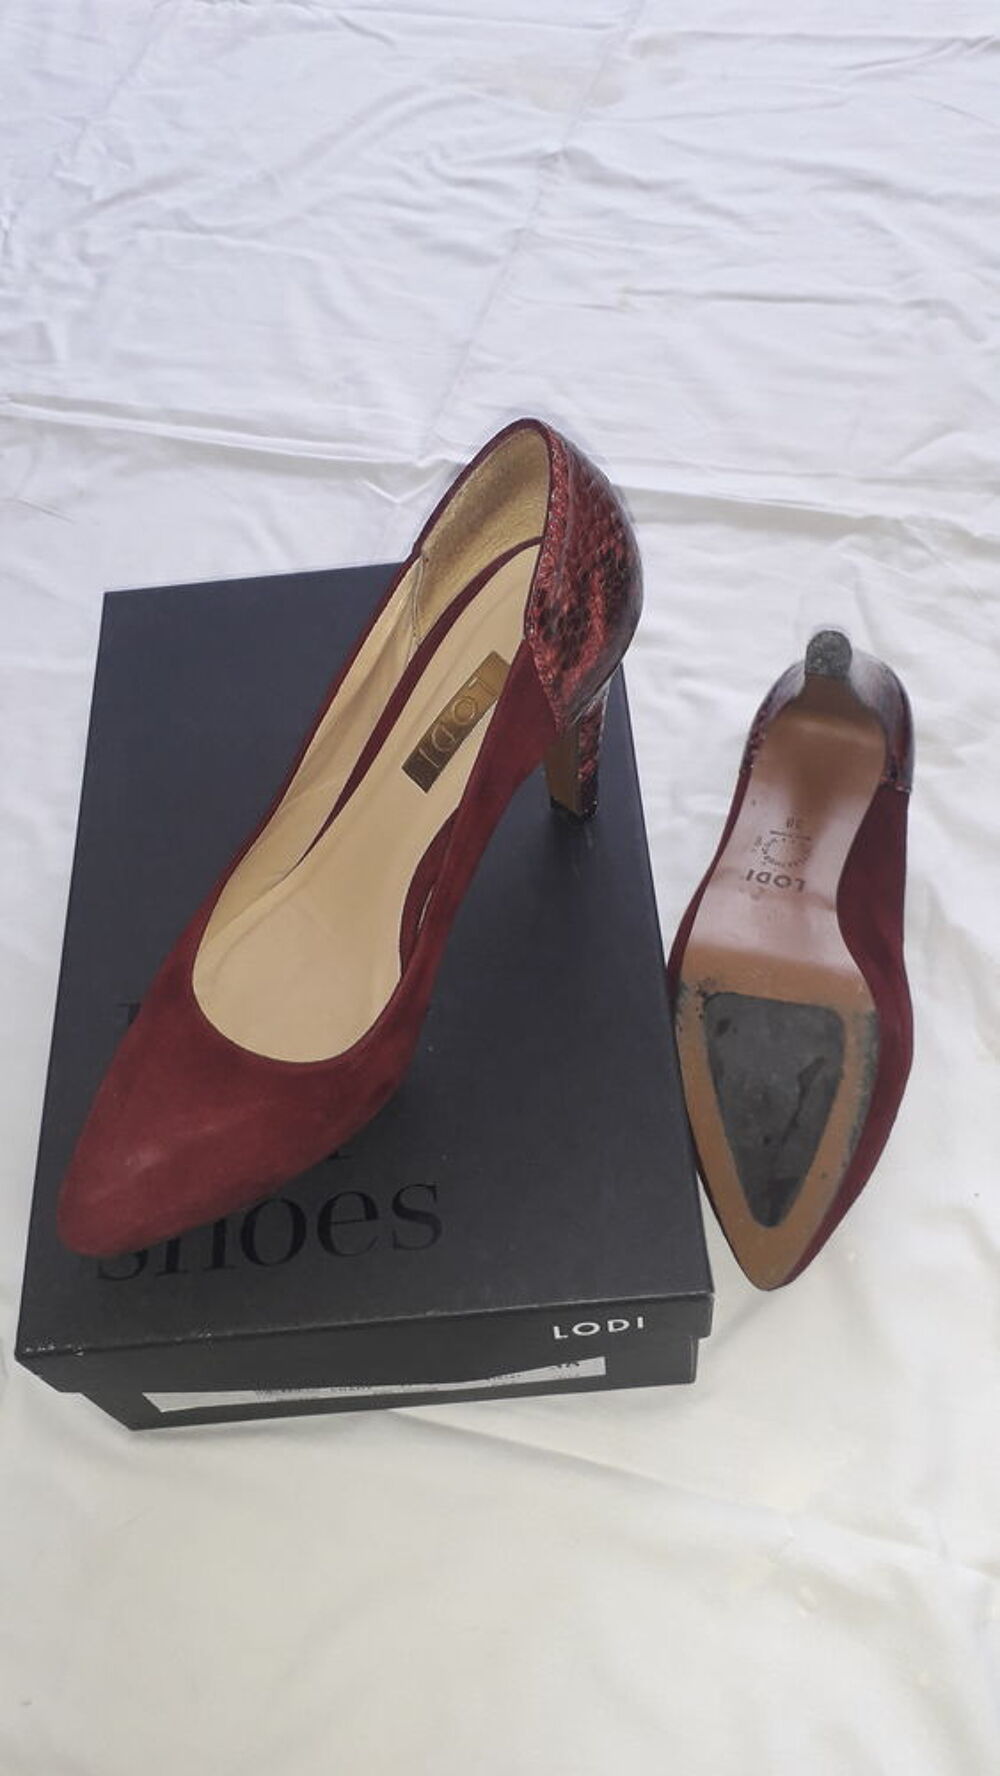 Chaussures femme LODI 38
Chaussures